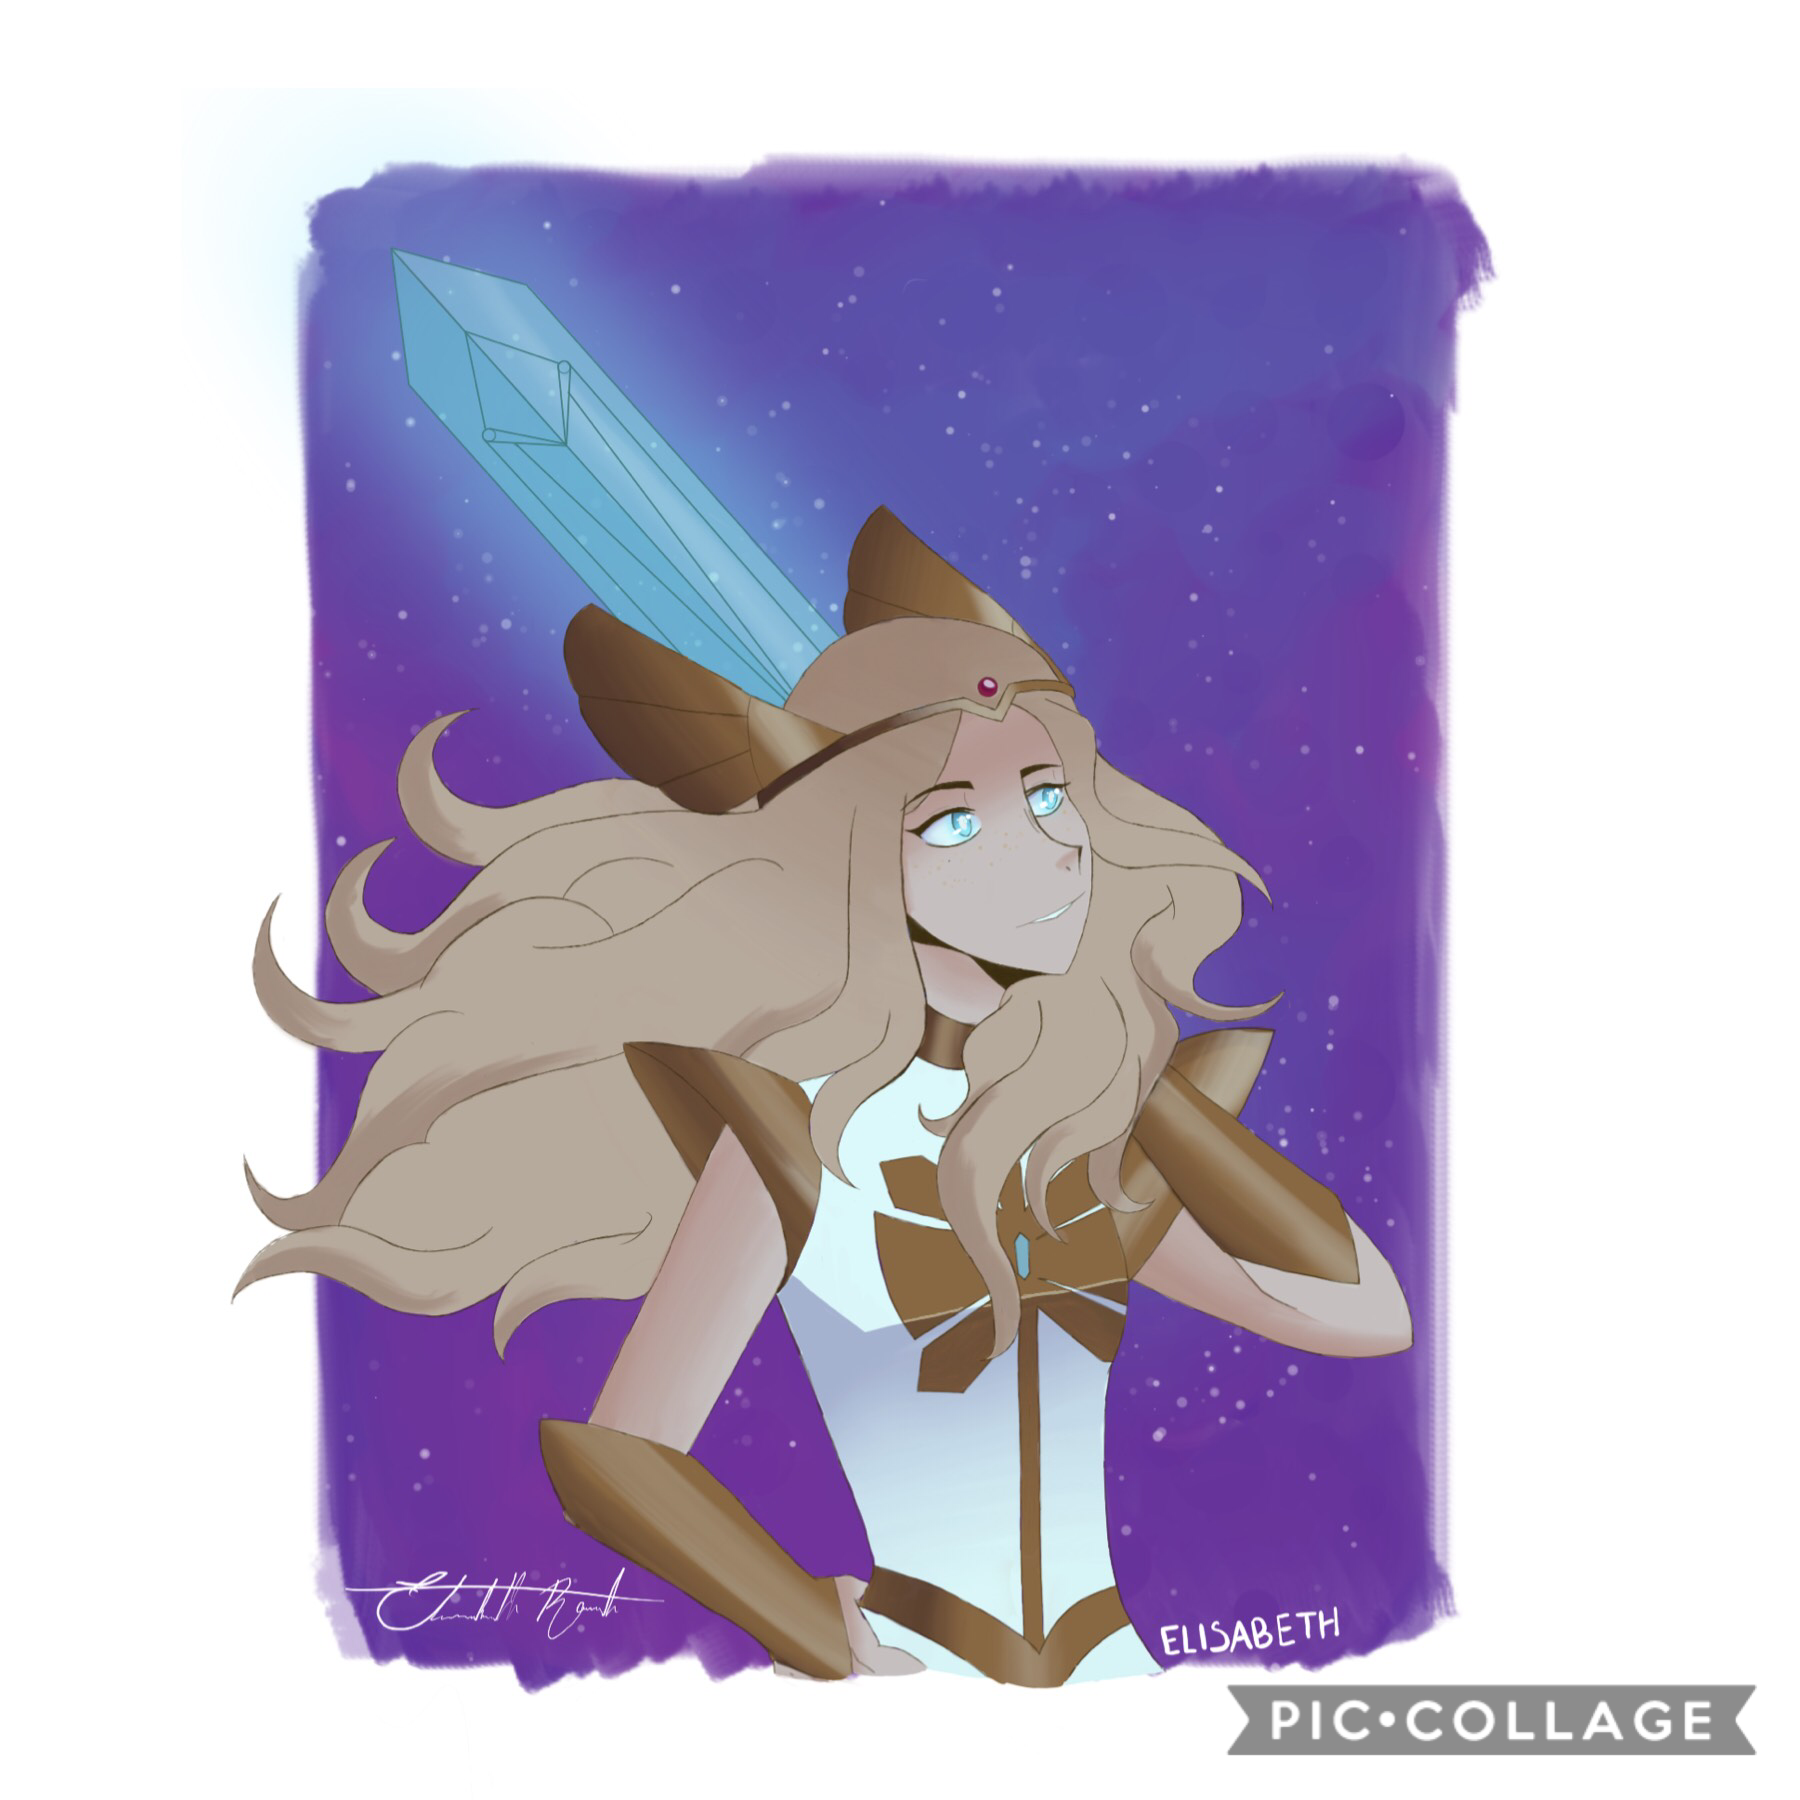 tap tap

i may or may not have forgotten about this account so have some she-ra fan art